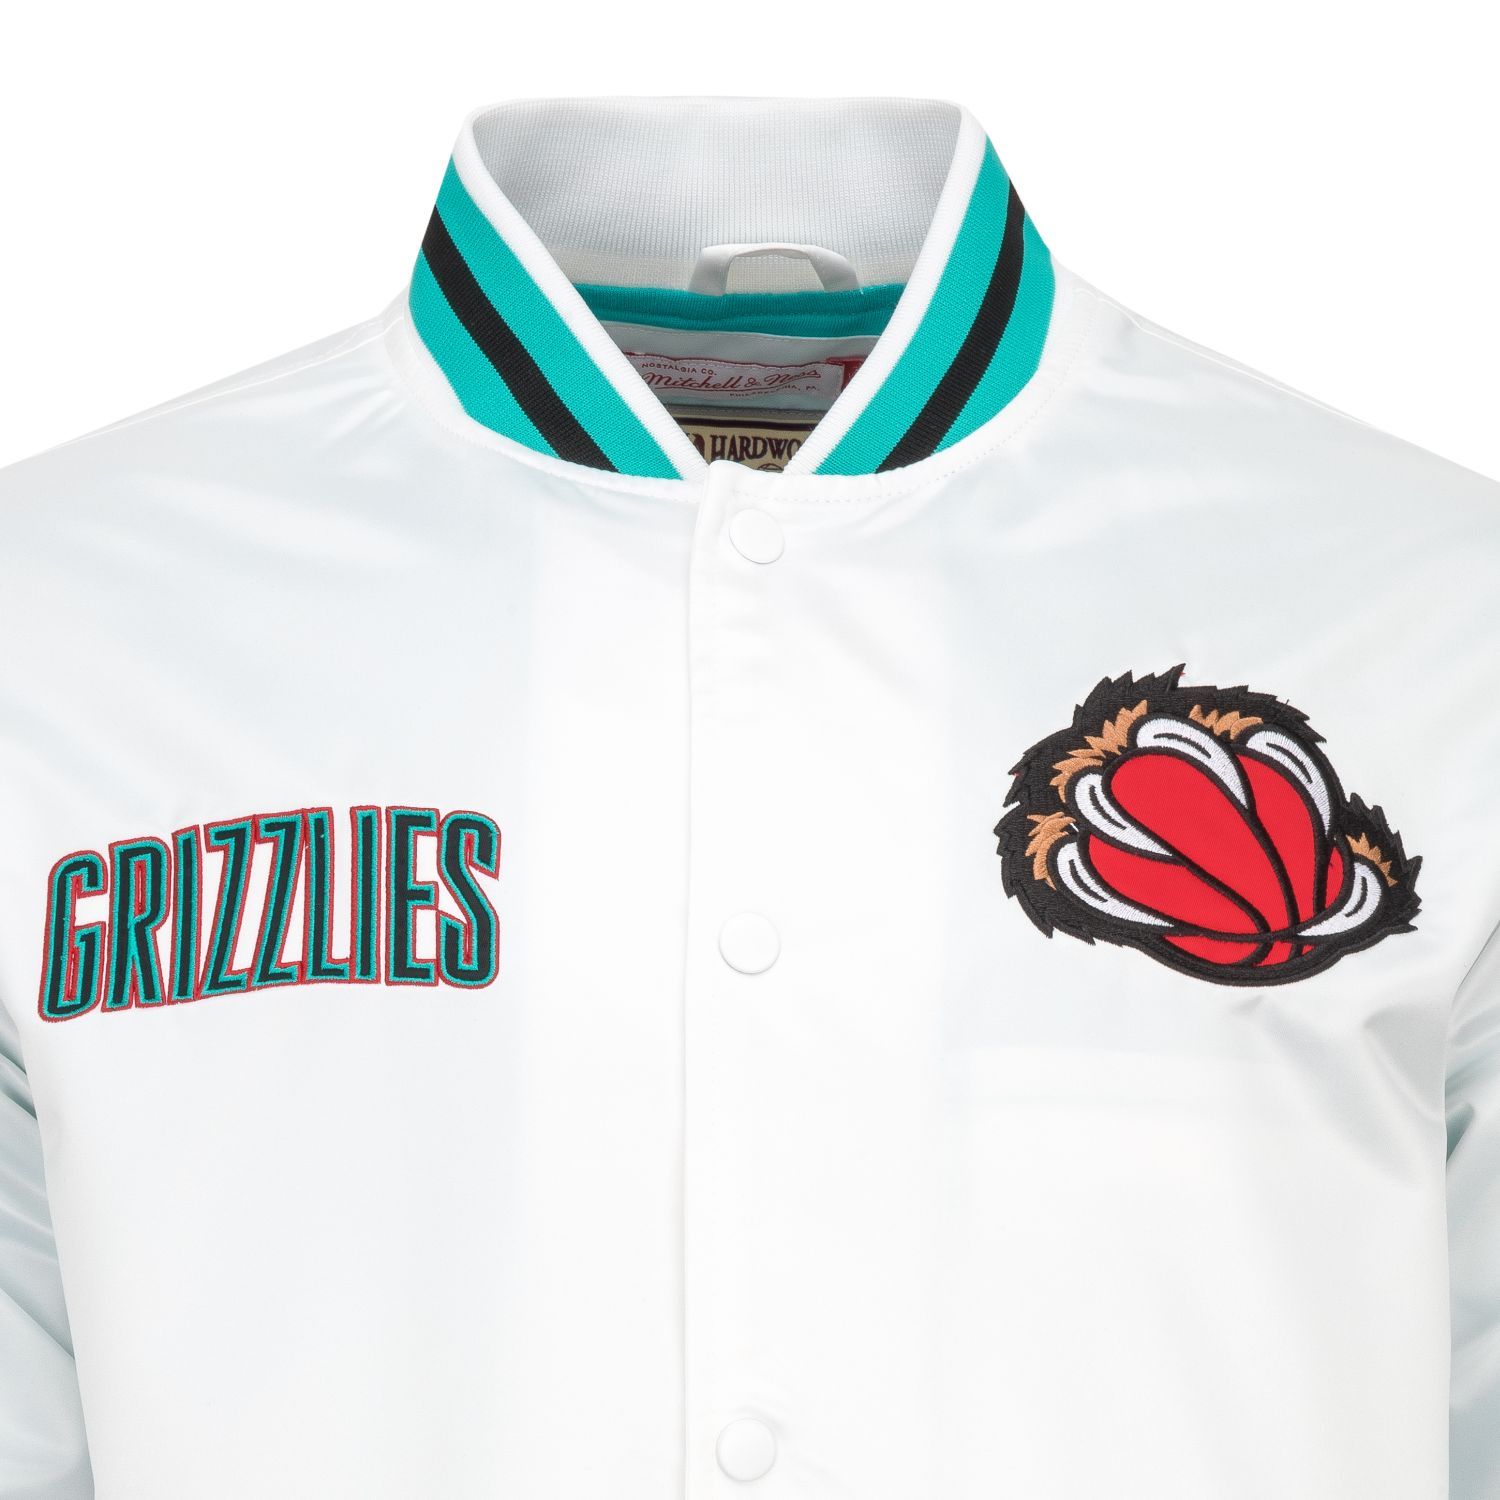 City Collection Lightweight Satin Jacket Vancouver Grizzlies